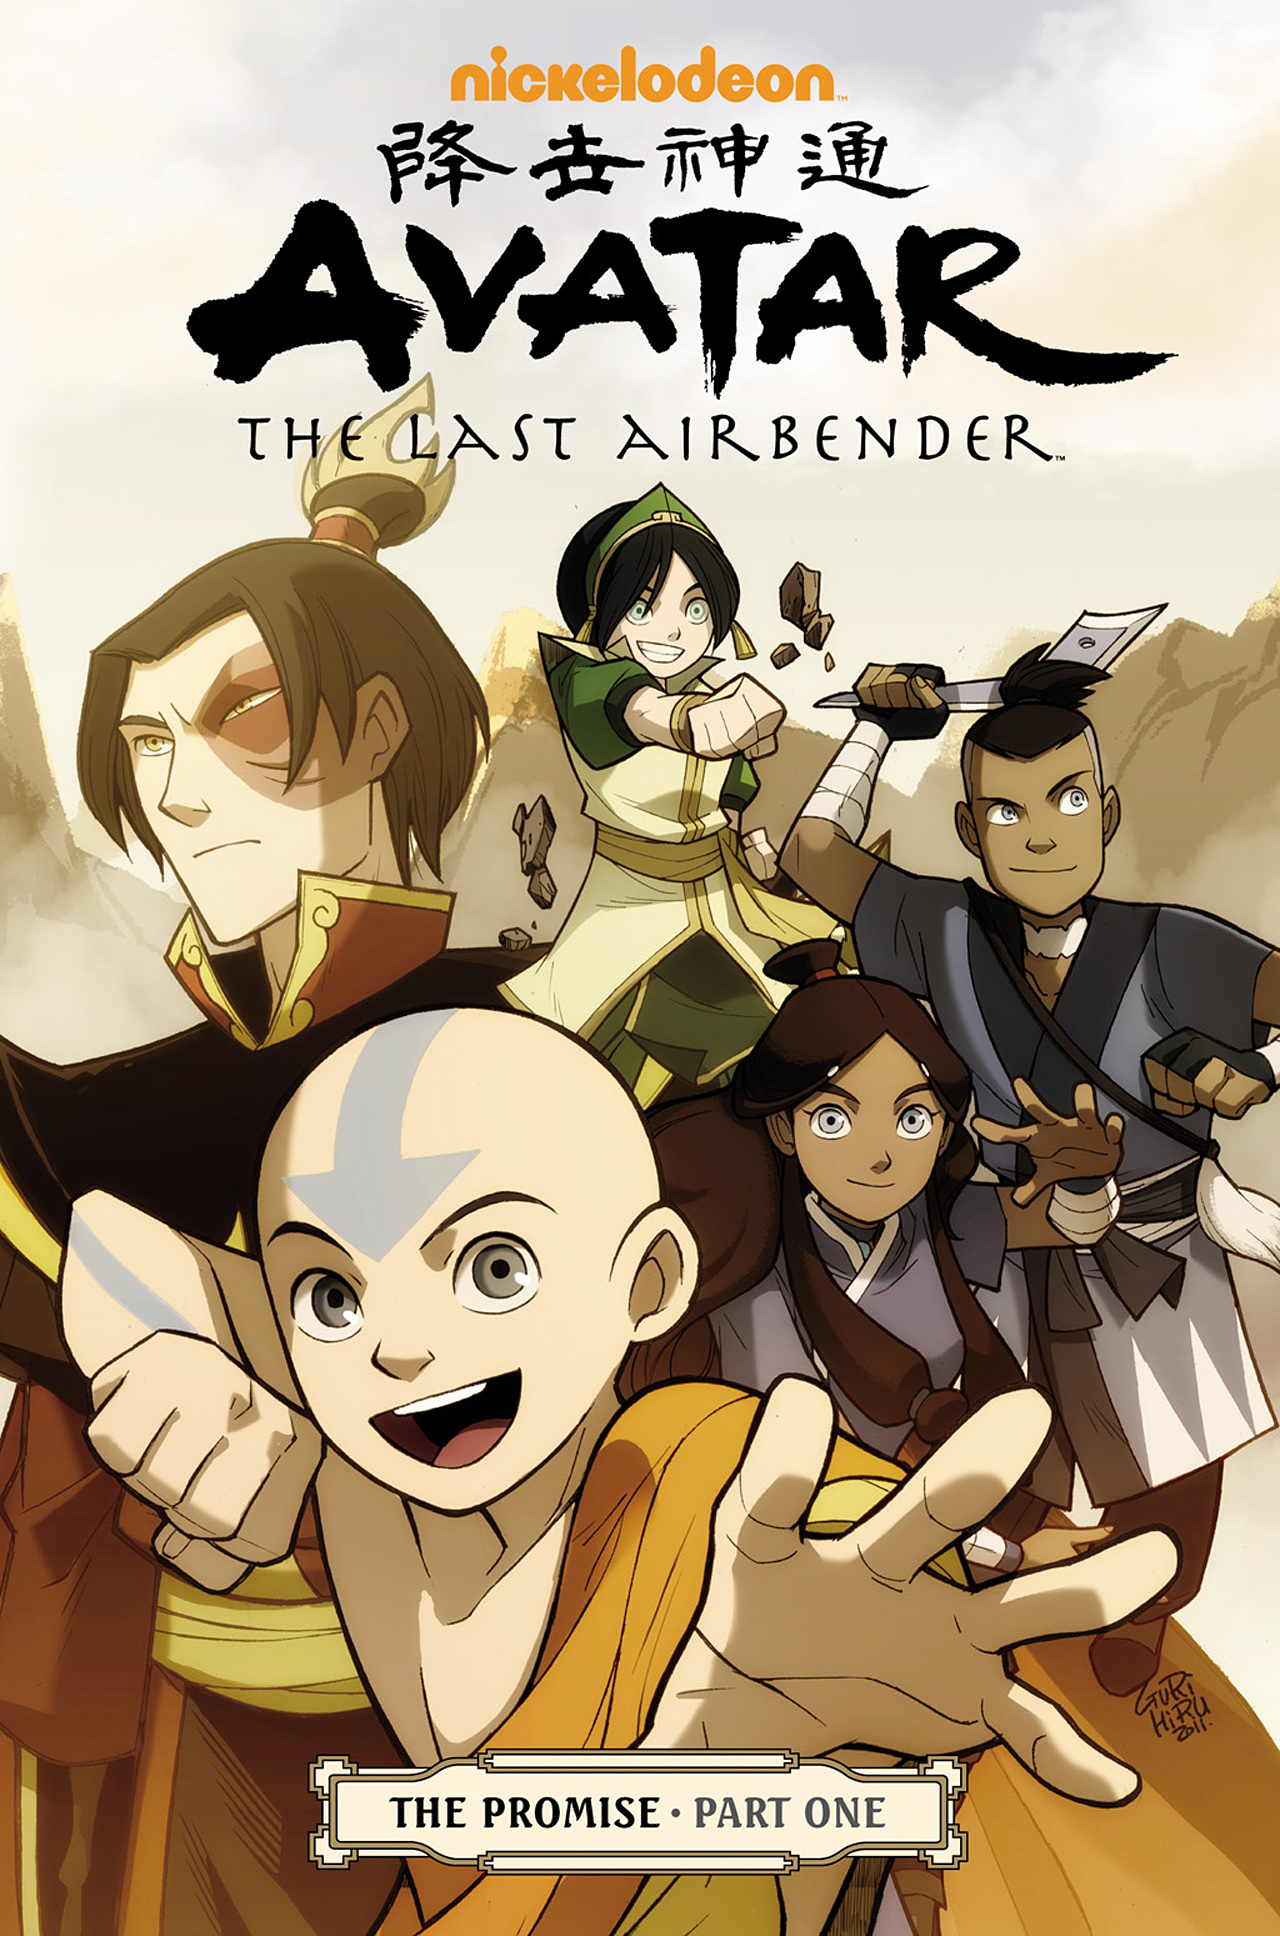 Read online Nickelodeon Avatar: The Last Airbender - The Promise comic -  Issue # Part 1 - 1